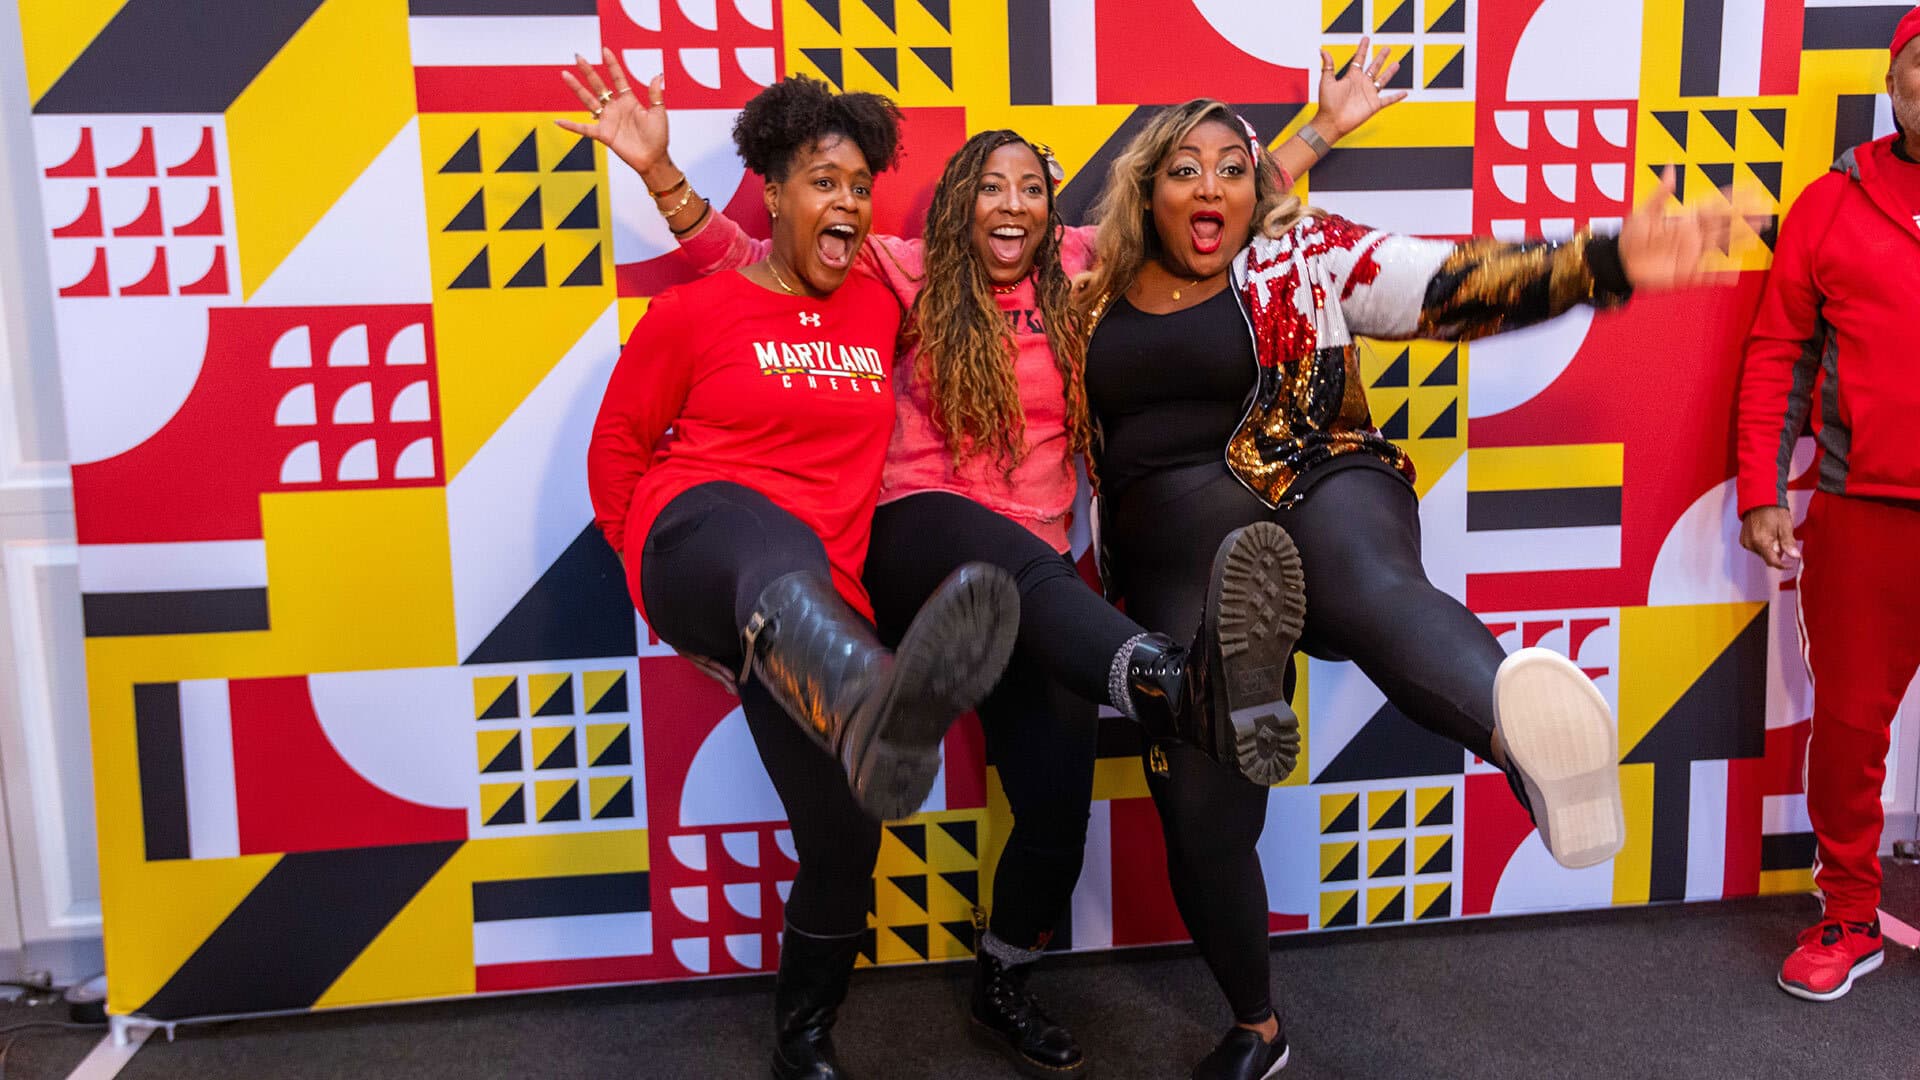 three people kick festively for the camera in front of a photo backdrop